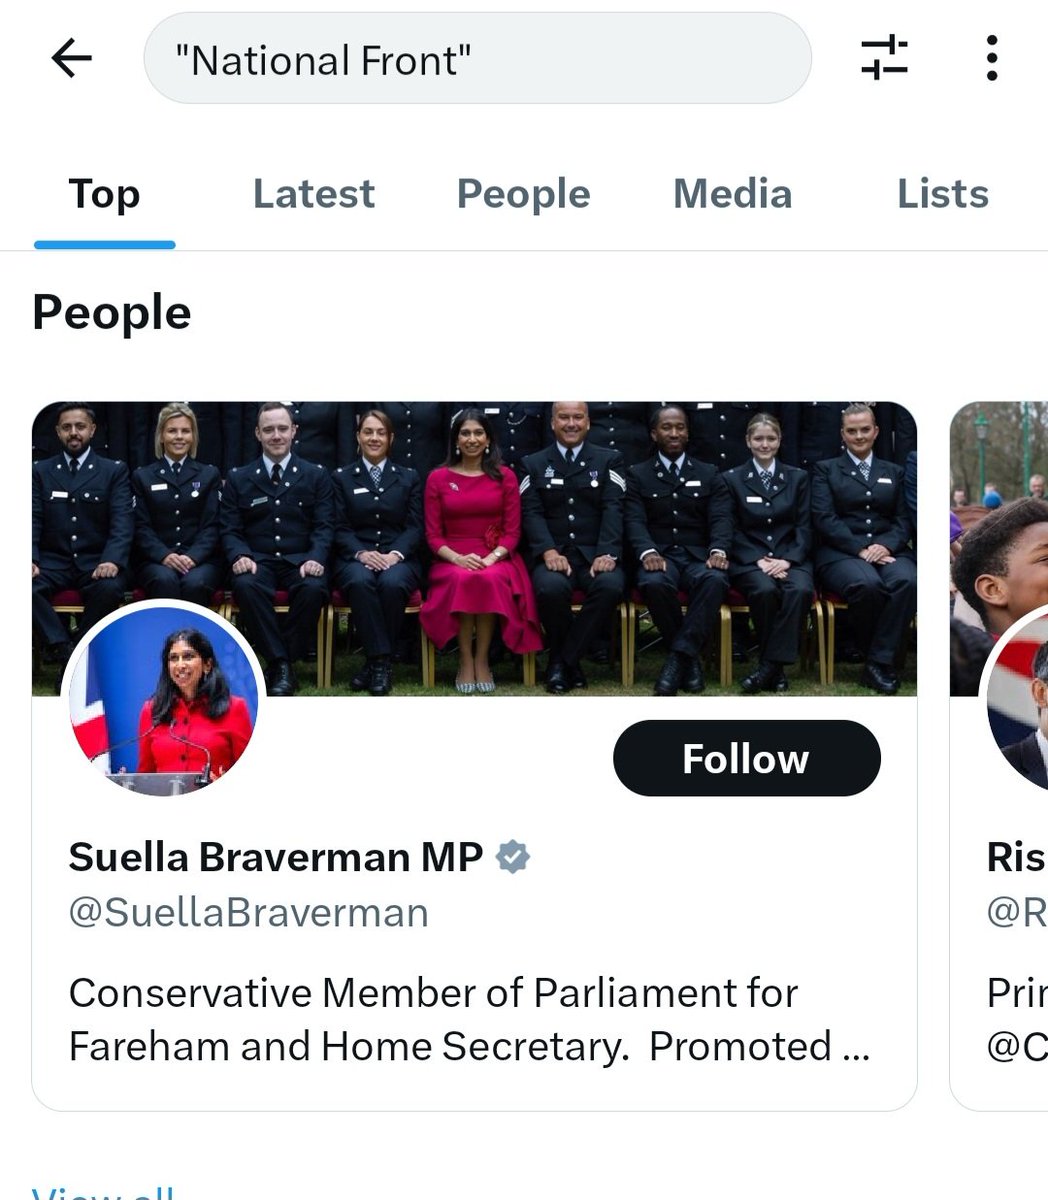 #NationalFront is trending, clicked... #SuellaBraverman appears.  How surprising.